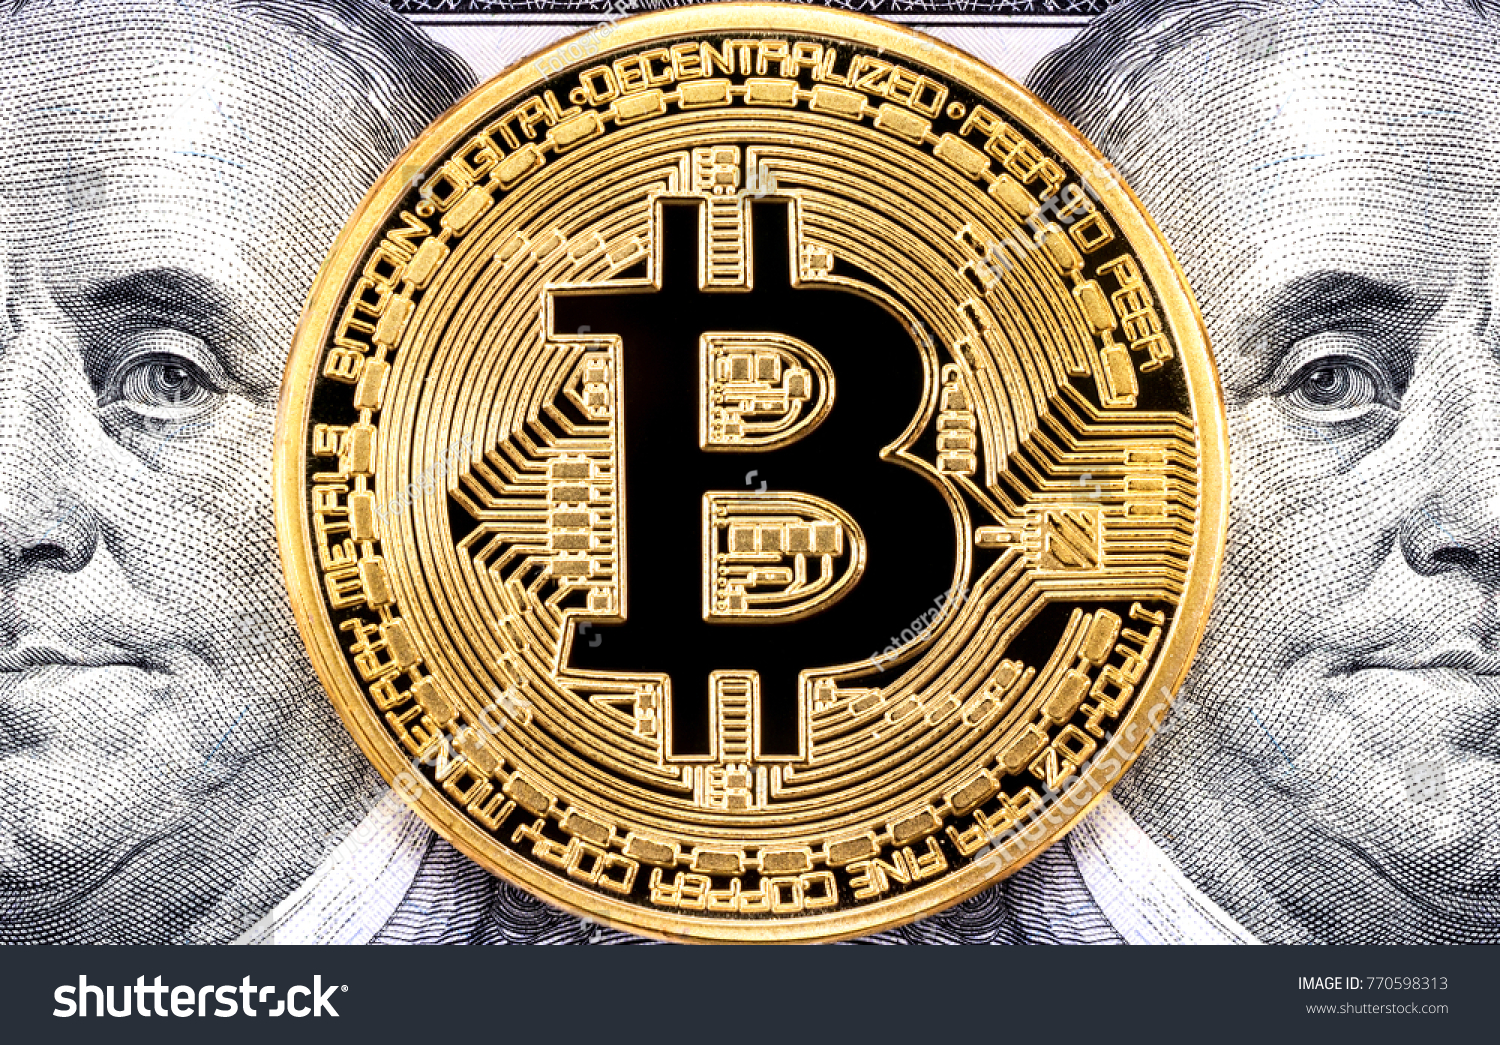 Golden bitcoin with Benjamin Franklin portrait from one hundred american dollars. Business concept of worldwide cryptocurrency #770598313